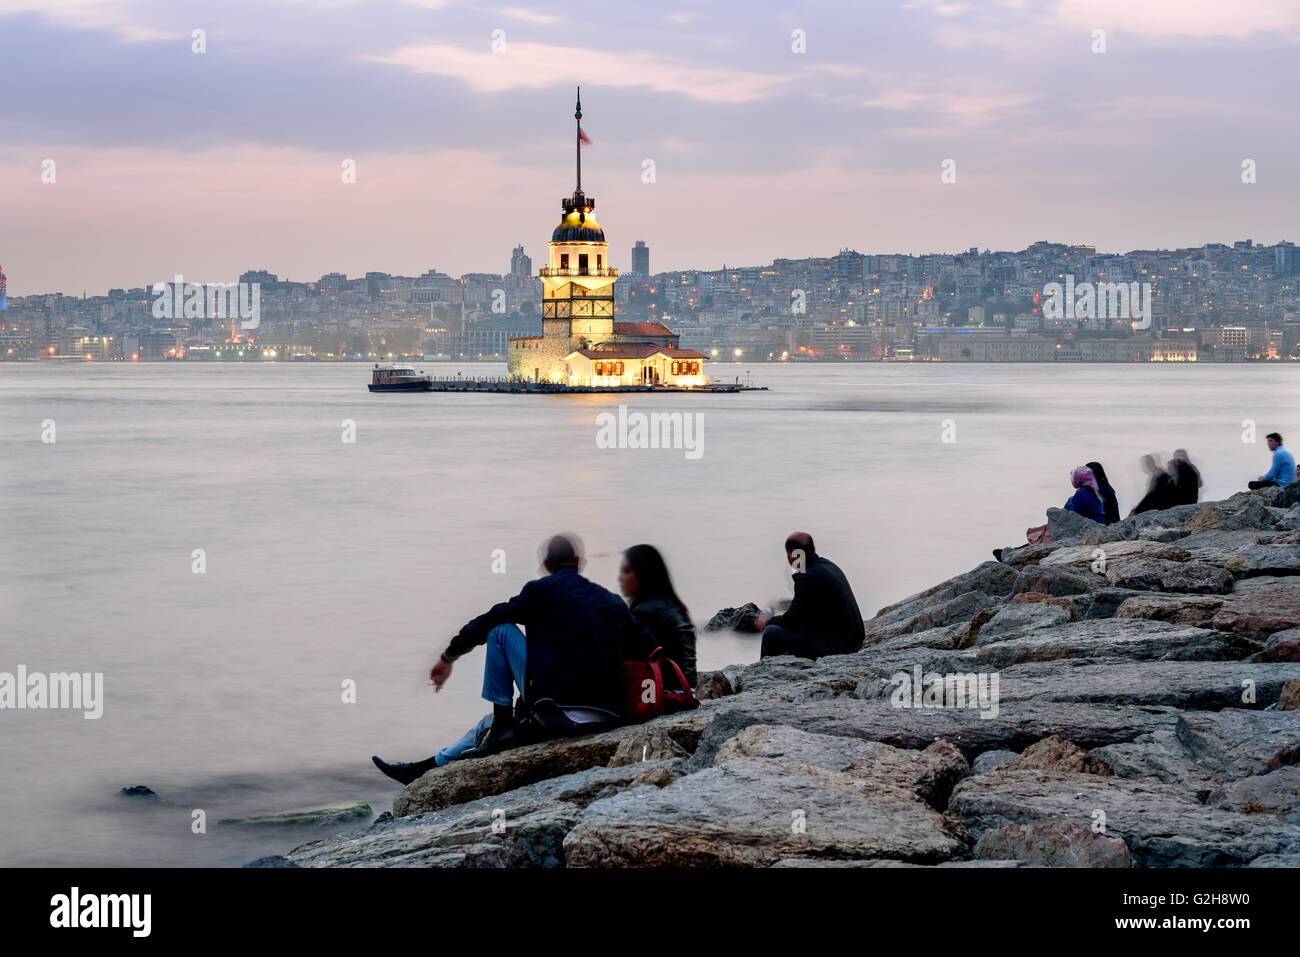 The Maiden's tower stands right in the middle of the Bosphorus in Istanbul Stock Photo